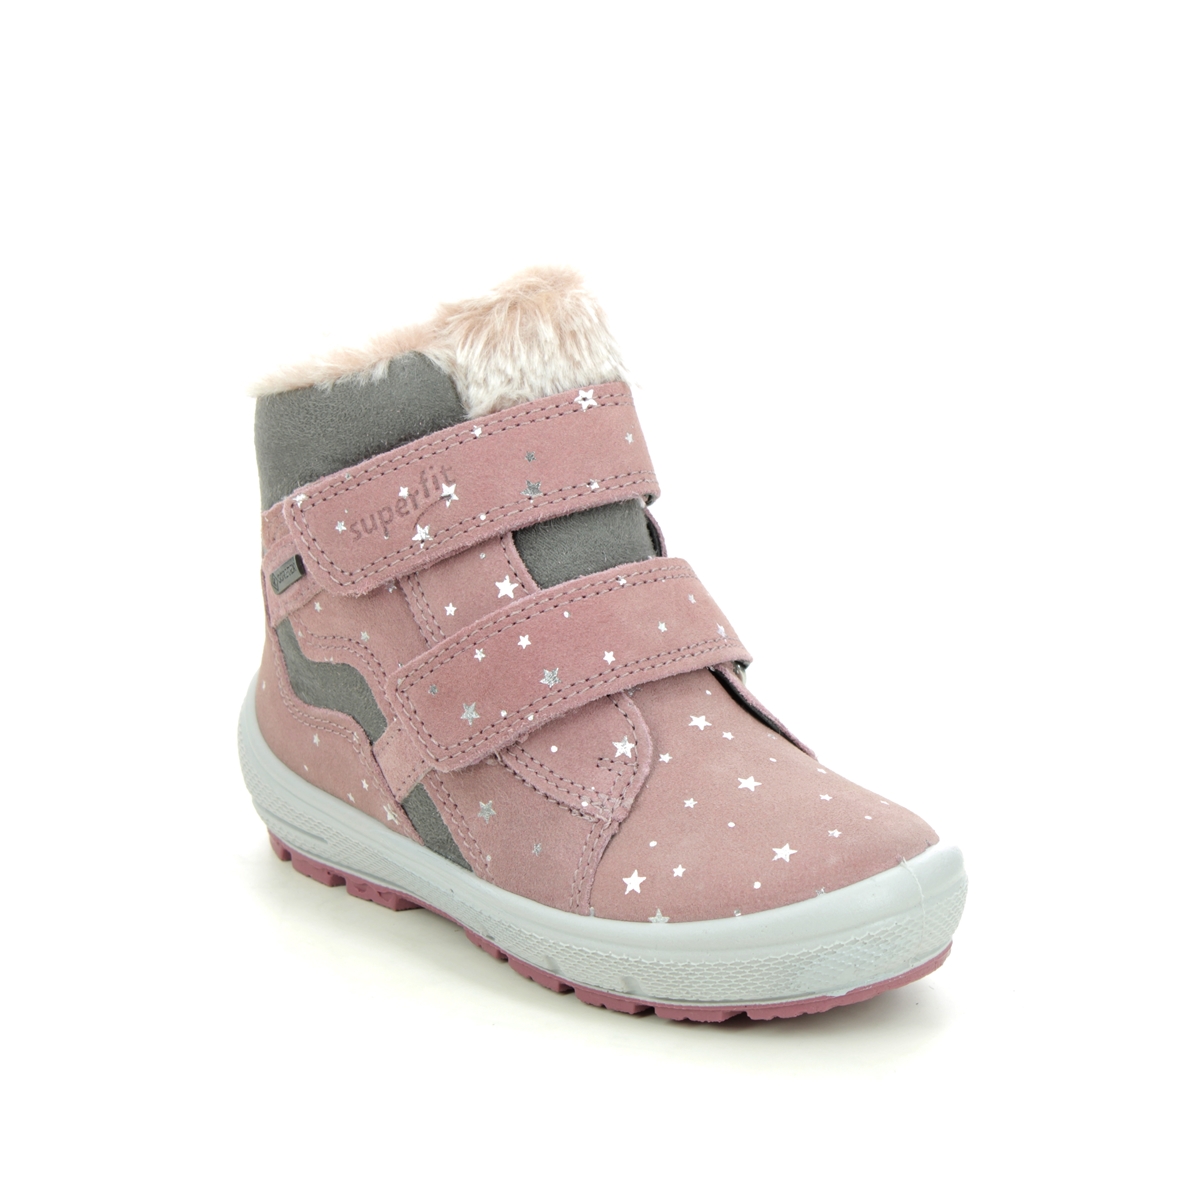 Superfit Groovy Gtx Pink Leather Kids Toddler Girls Boots 1006316-5500 In Size 23 In Plain Pink Leather